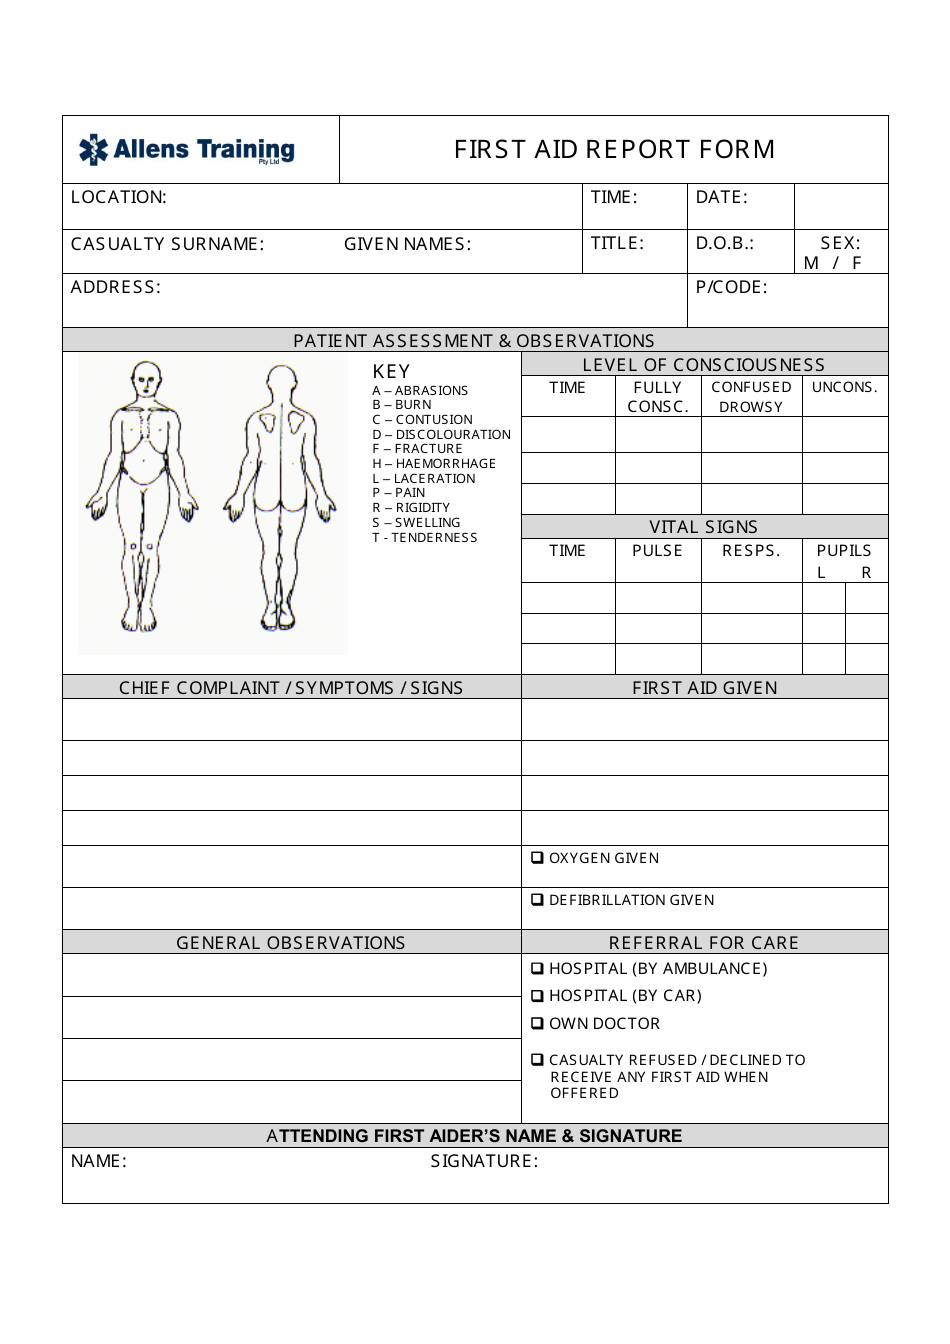 First Aid Report Form - Allens Training, Page 1